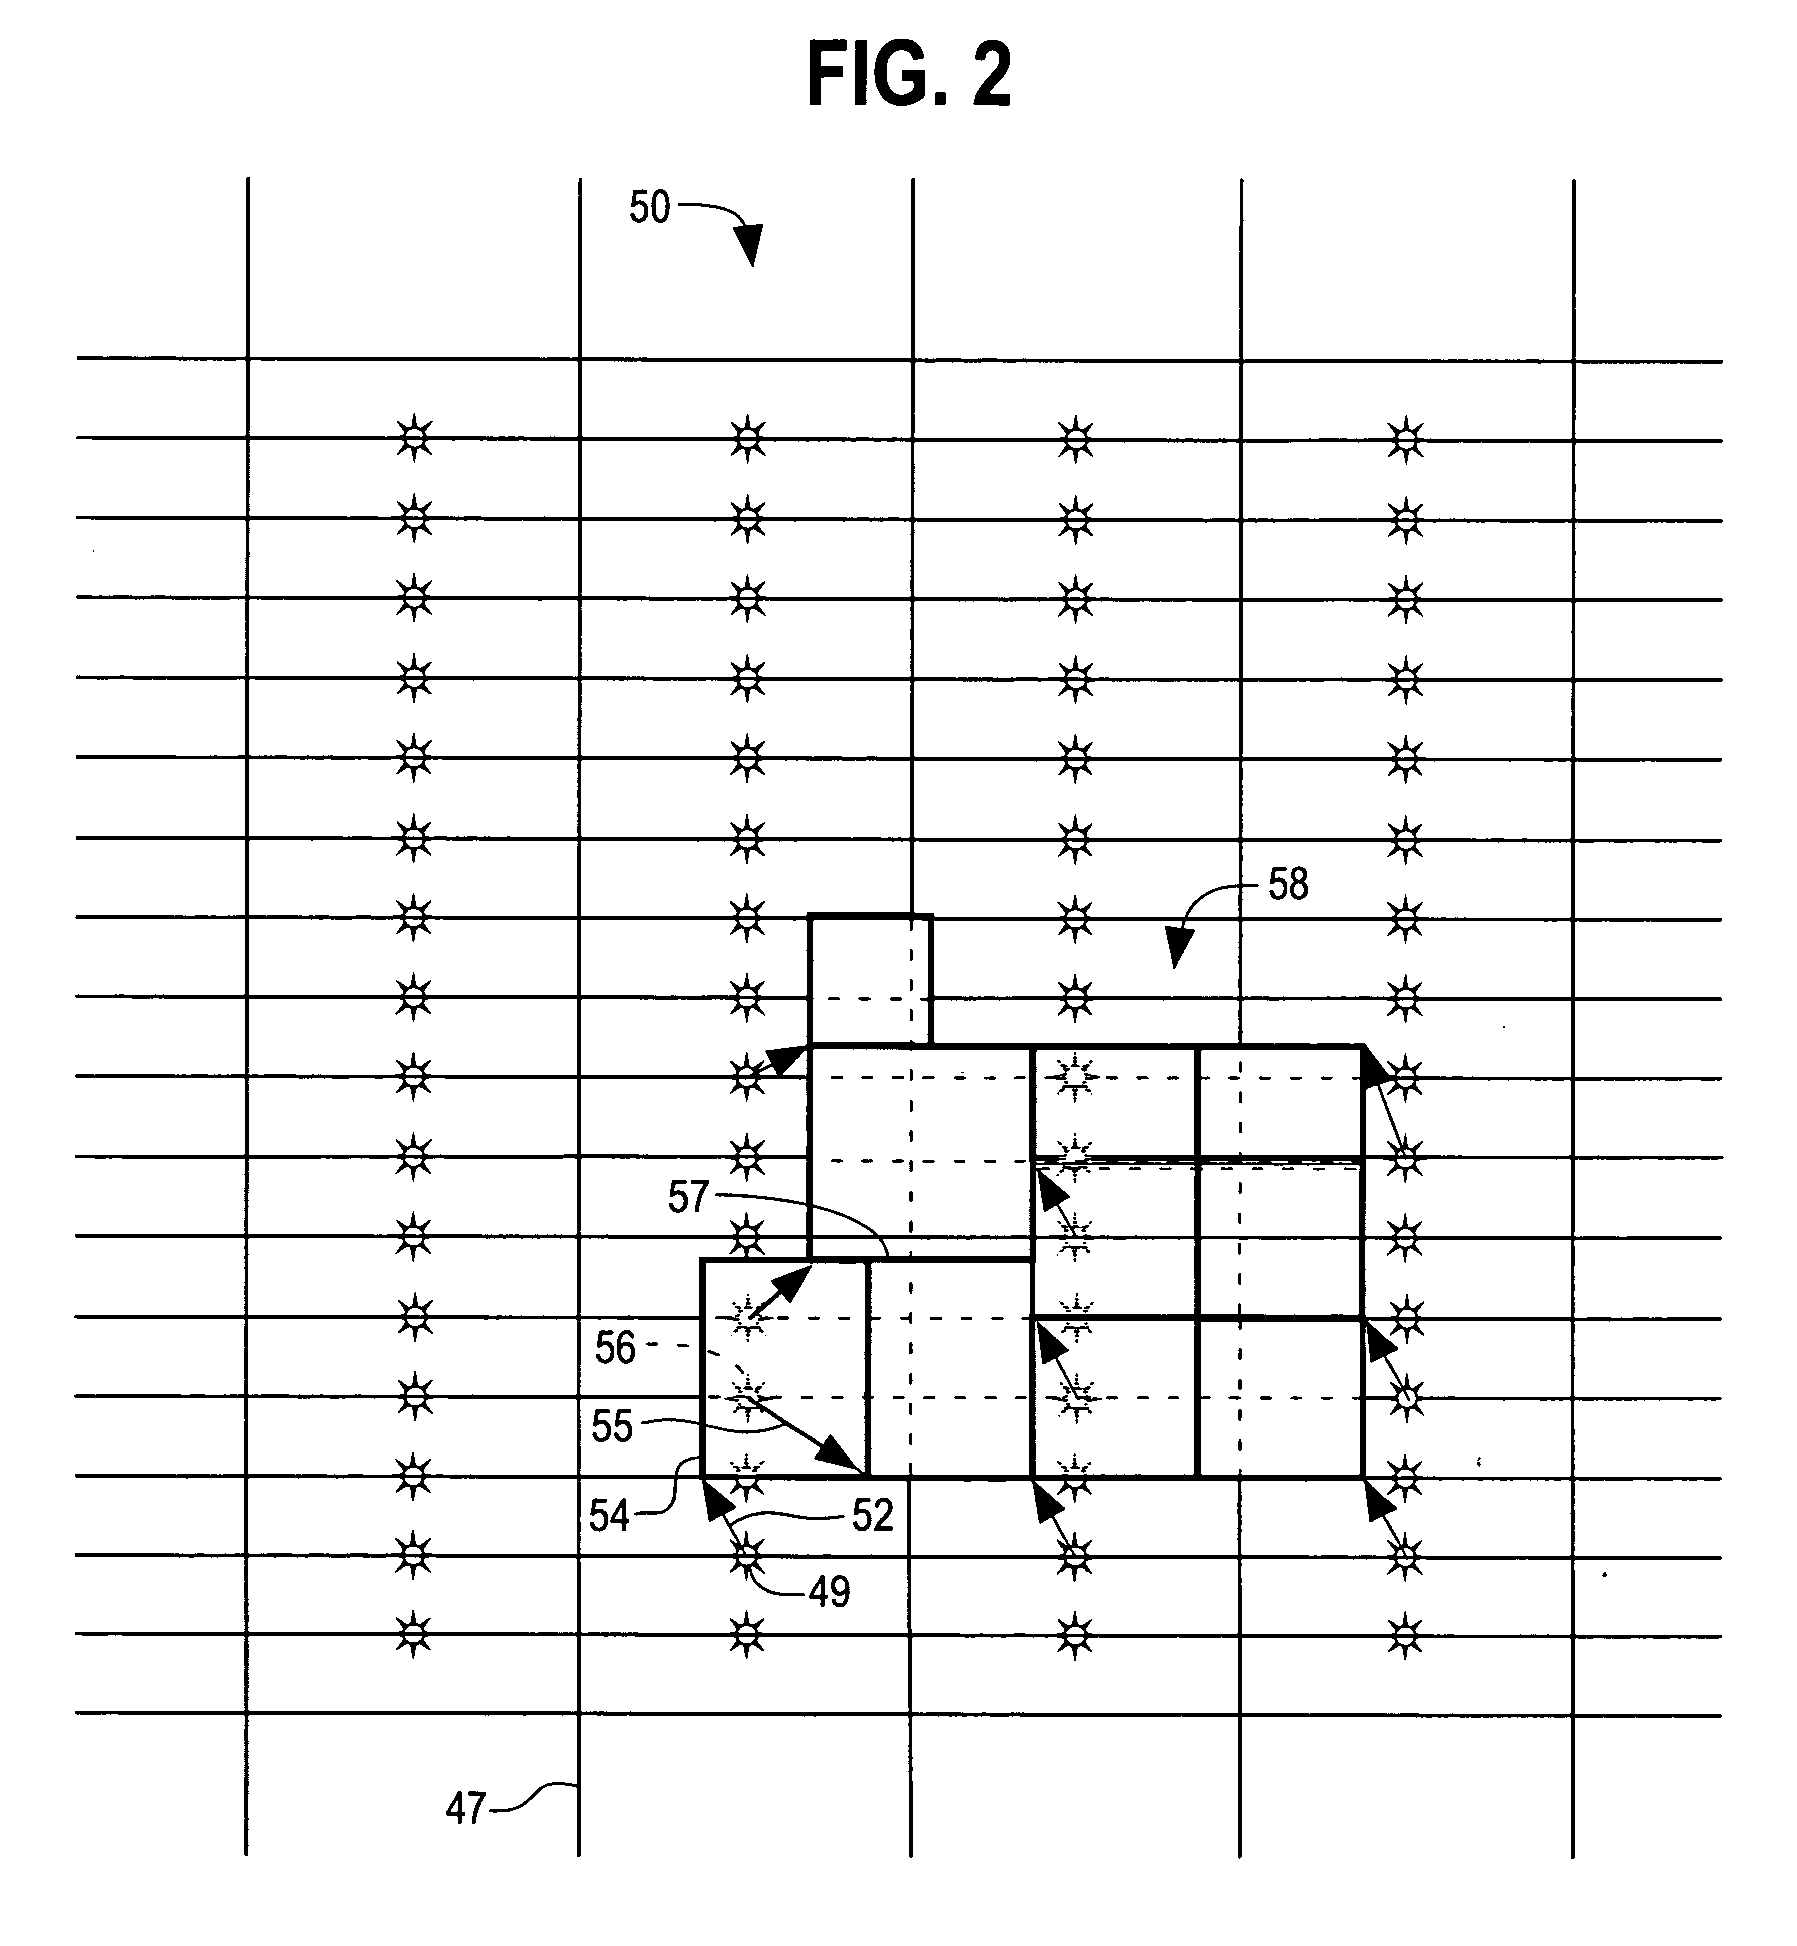 Beam exposure writing strategy system and method